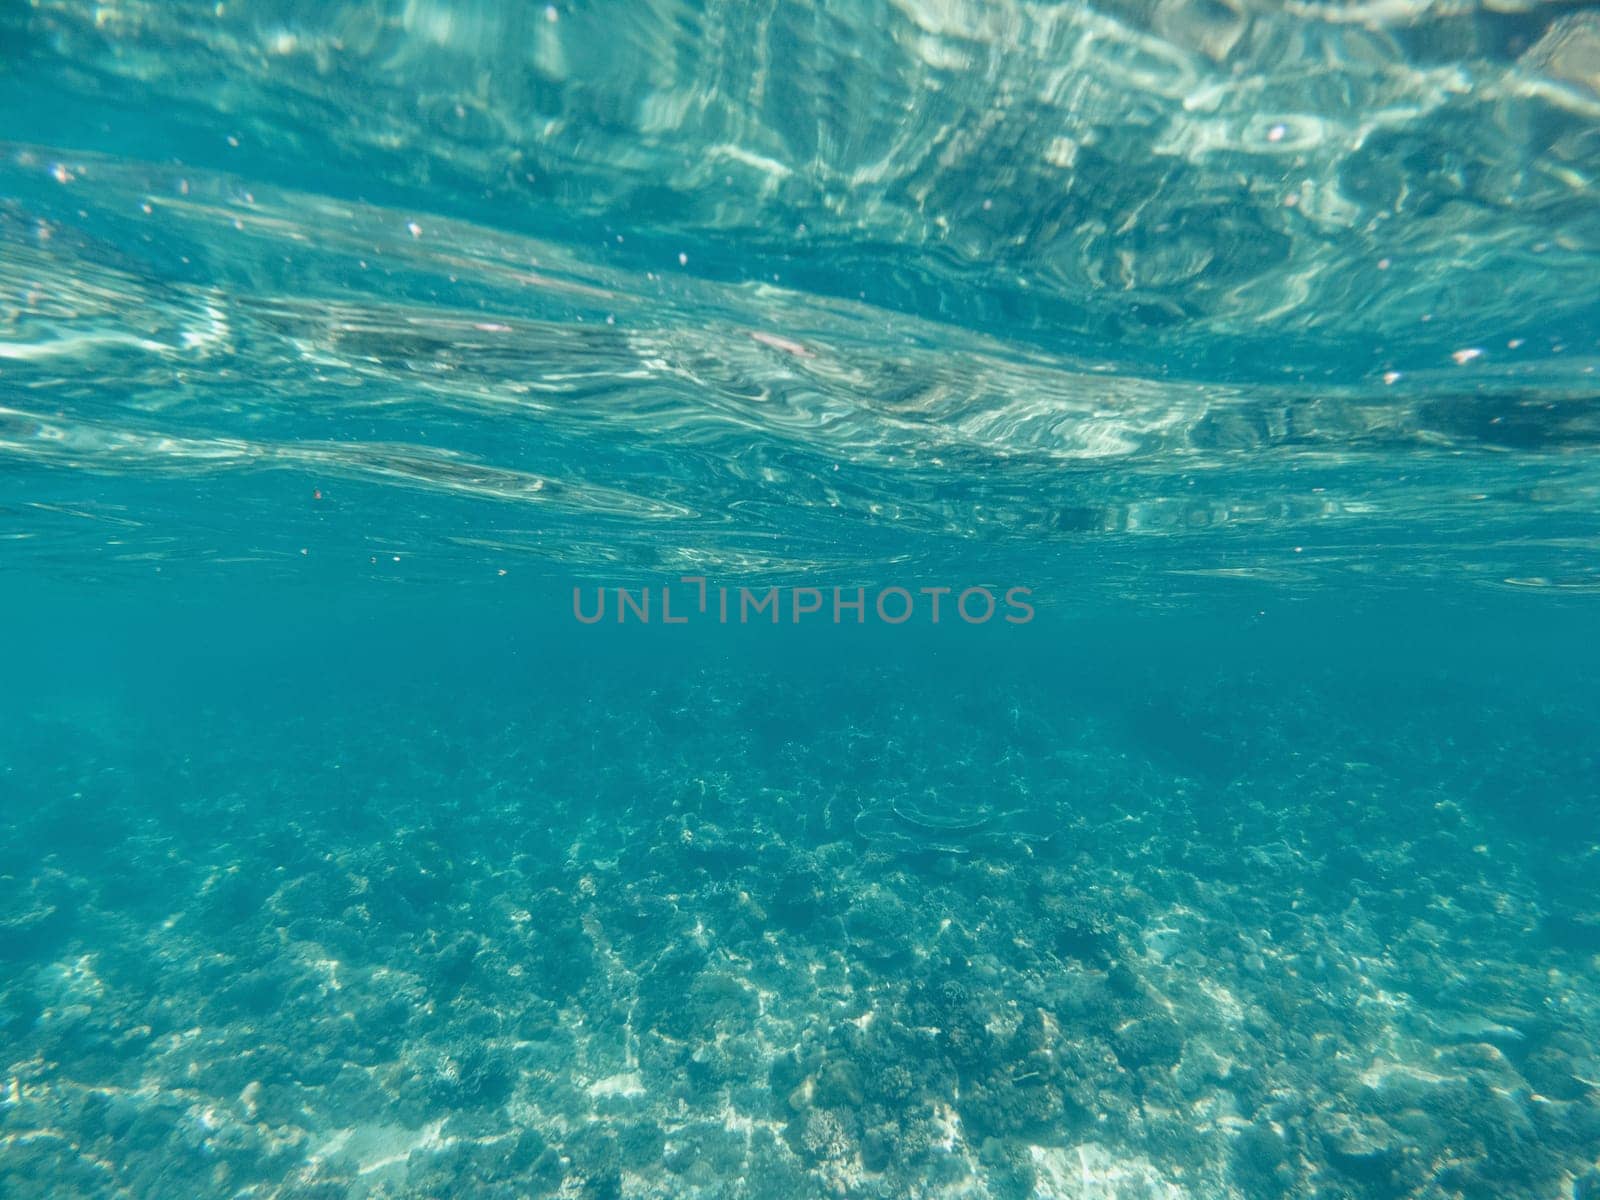 Underwater with sunlight pouring in, glistening water crests on white sand, and clear tropical waters. Underwater background of clear blue water on sandy sea floor by Busker